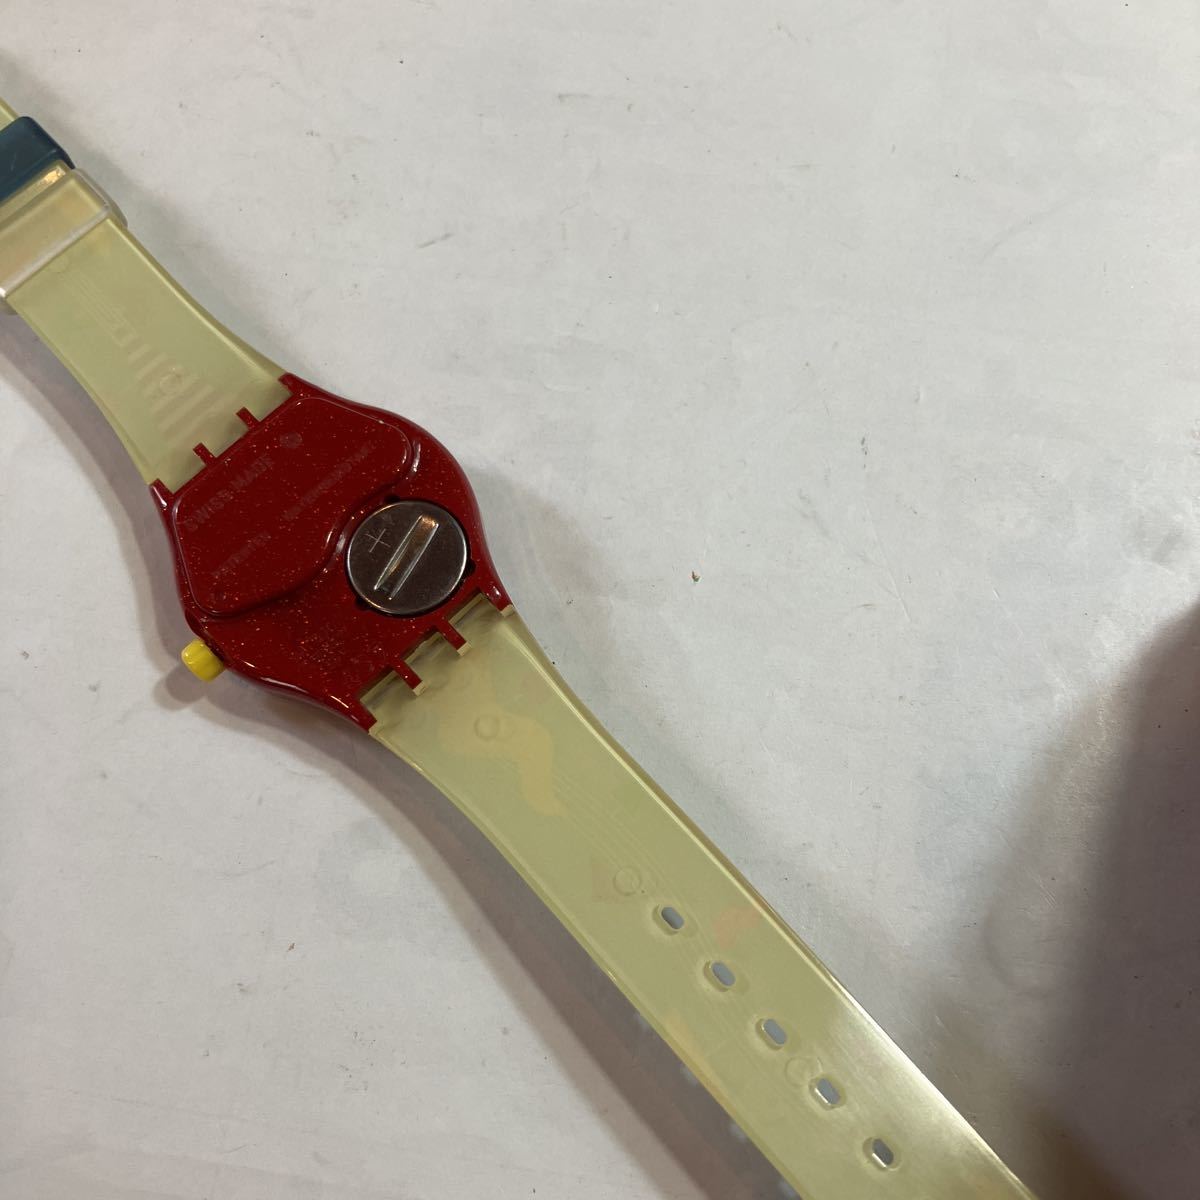  operation verification ending Swatch MUSICALL E2 new goods unused beautiful goods WATER RESISTANT Switzerland made 